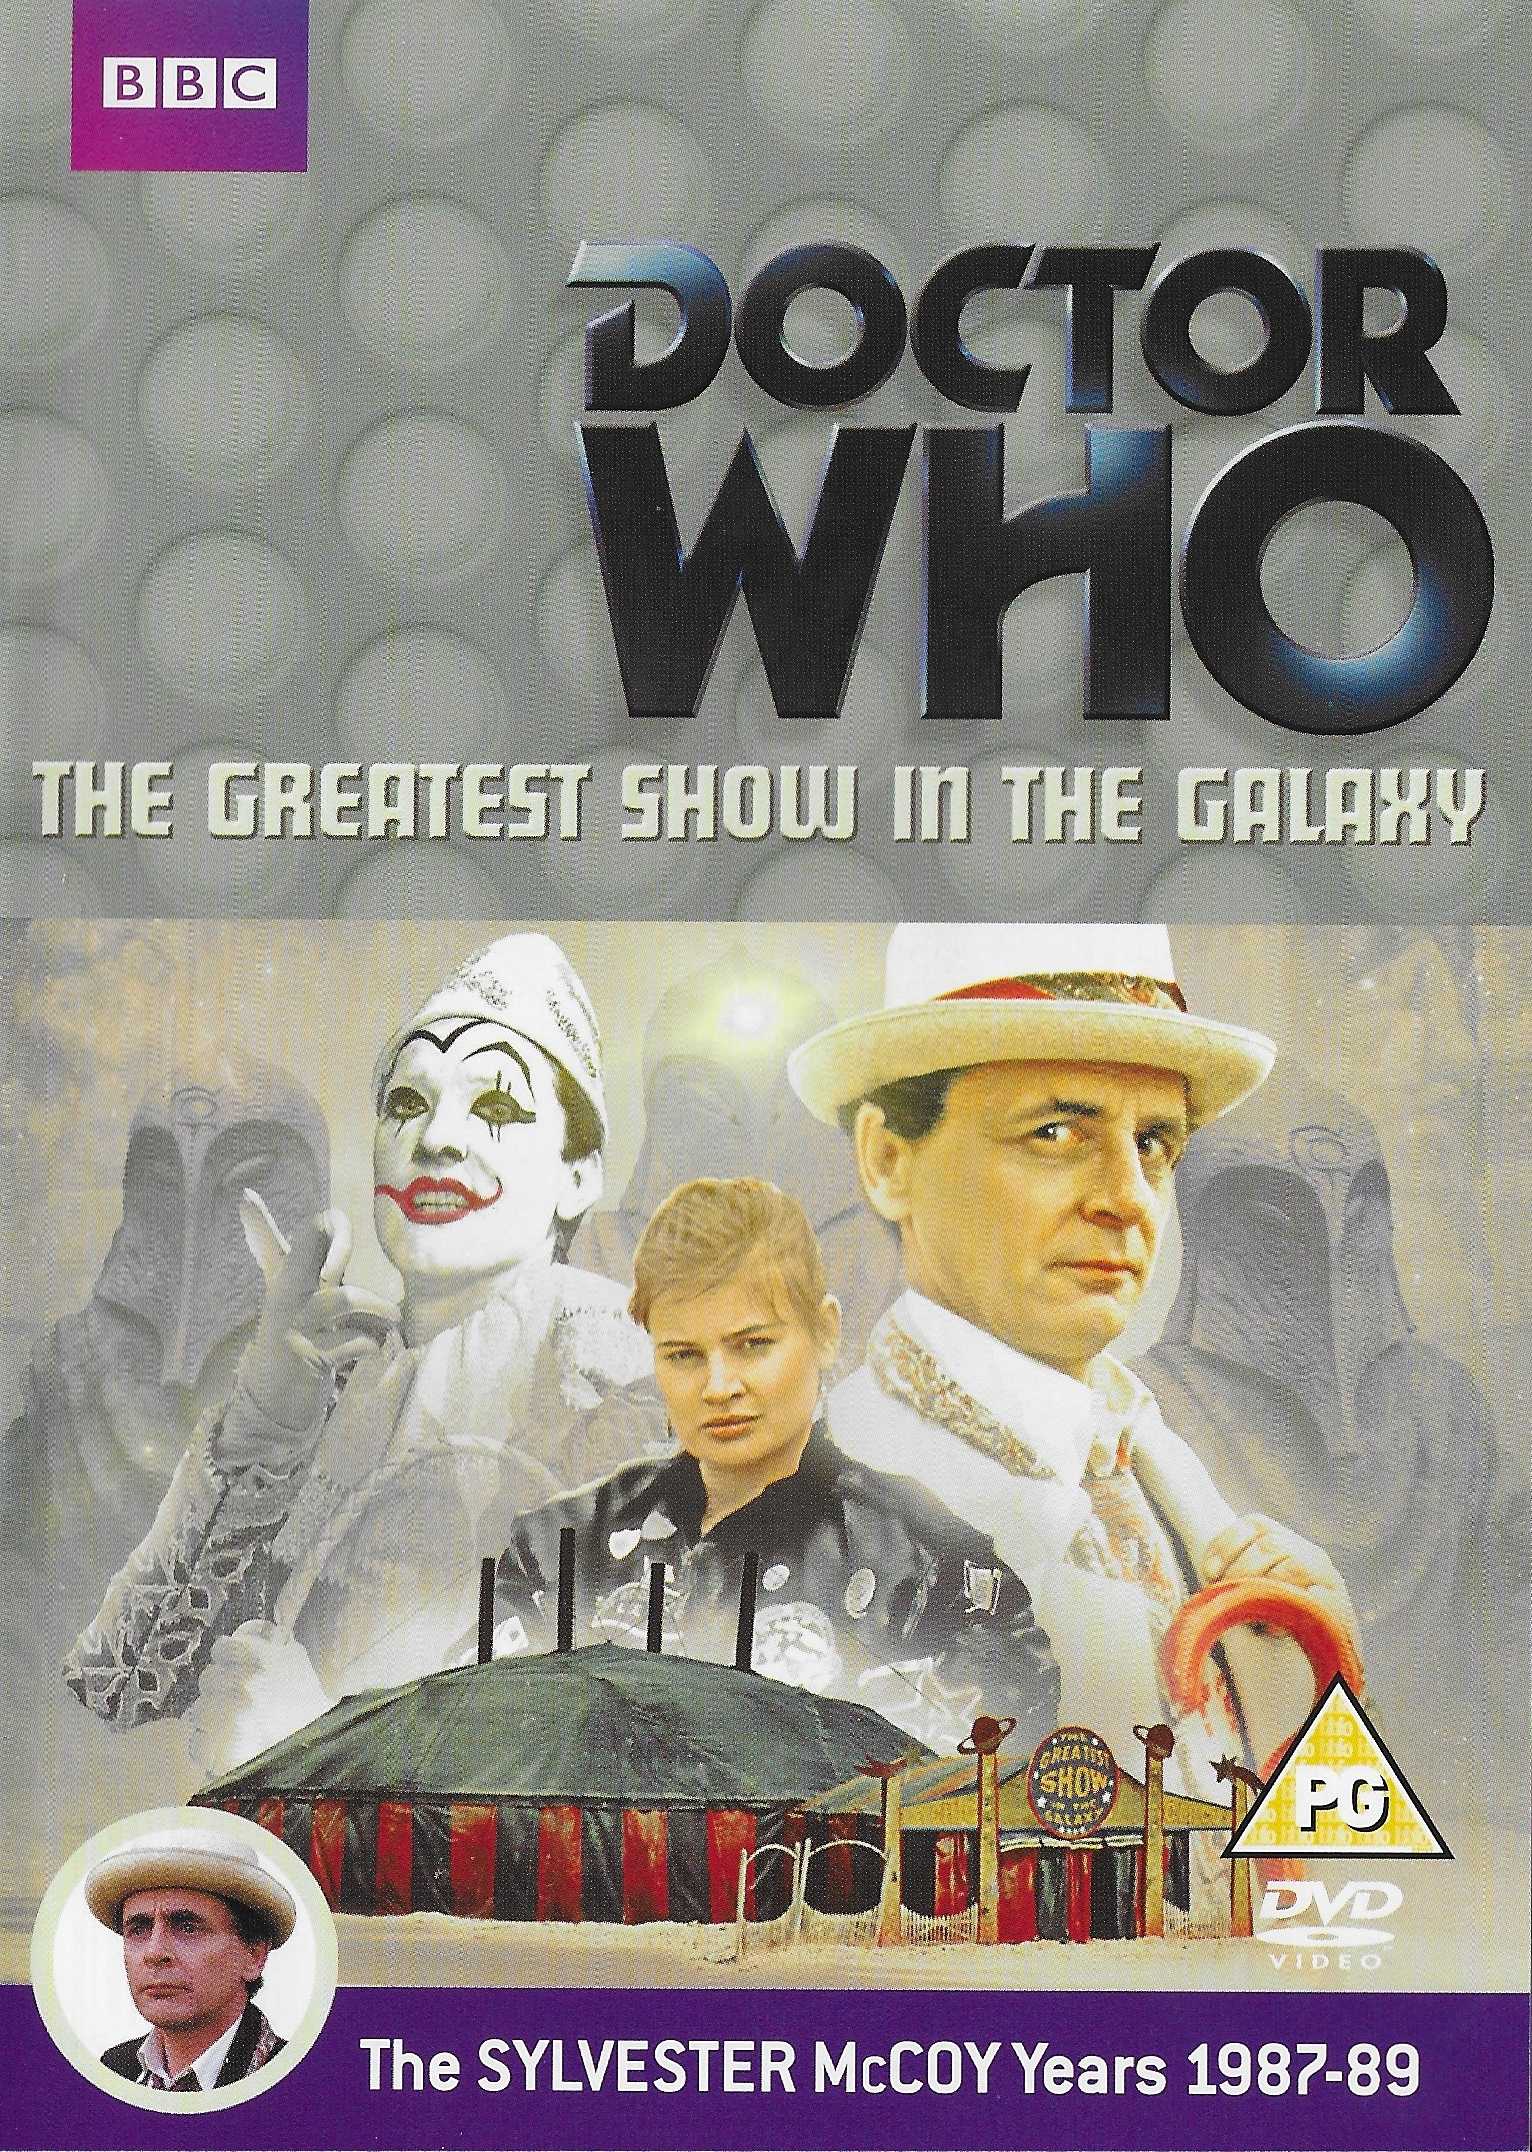 Picture of BBCDVD 3481 Doctor Who - The greatest show in the galaxy by artist Stephen Wyatt from the BBC records and Tapes library